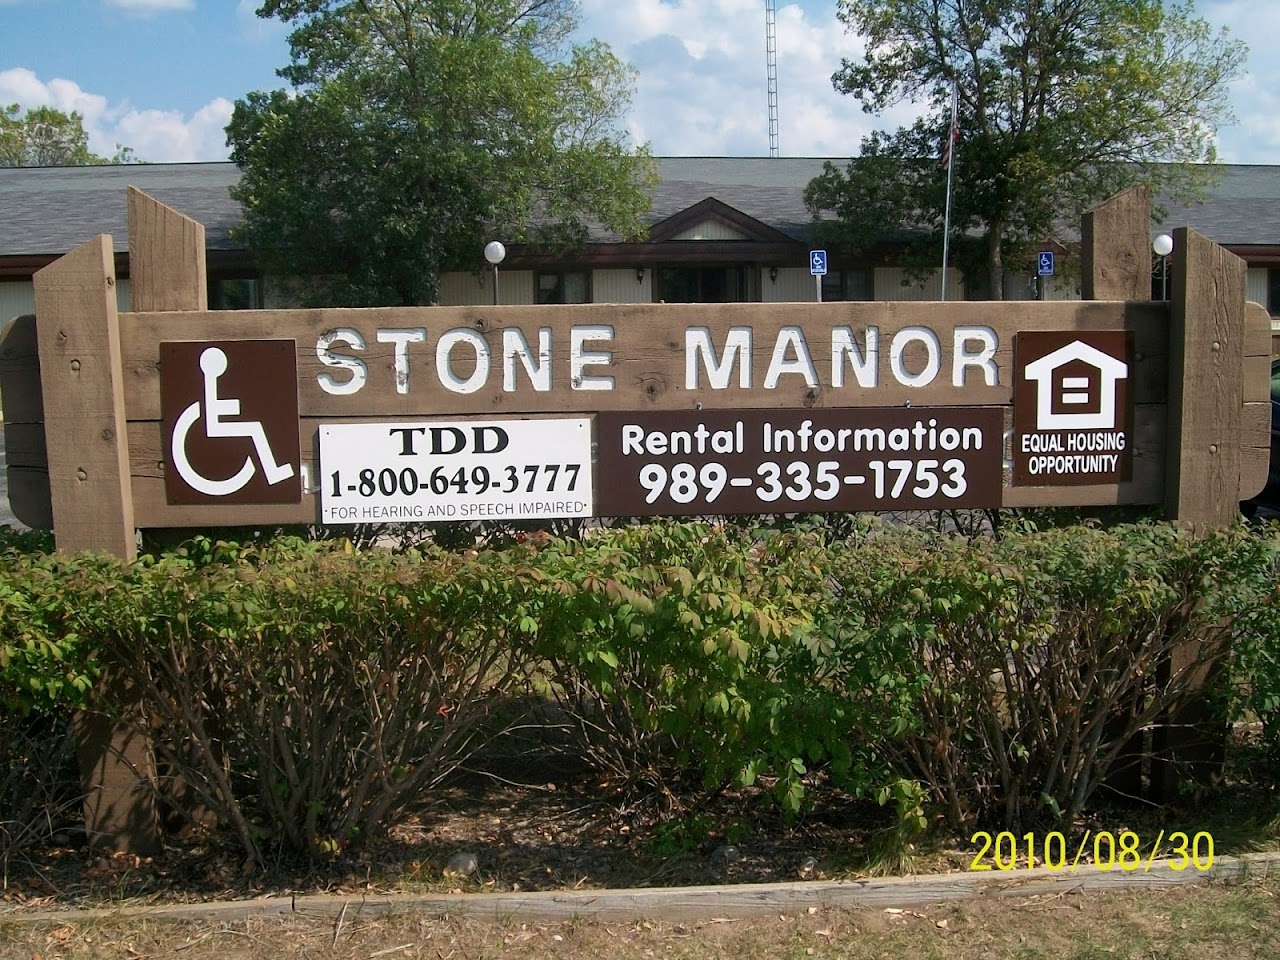 Photo of STONE MANOR. Affordable housing located at 122 MAPLE ST MIO, MI 48647